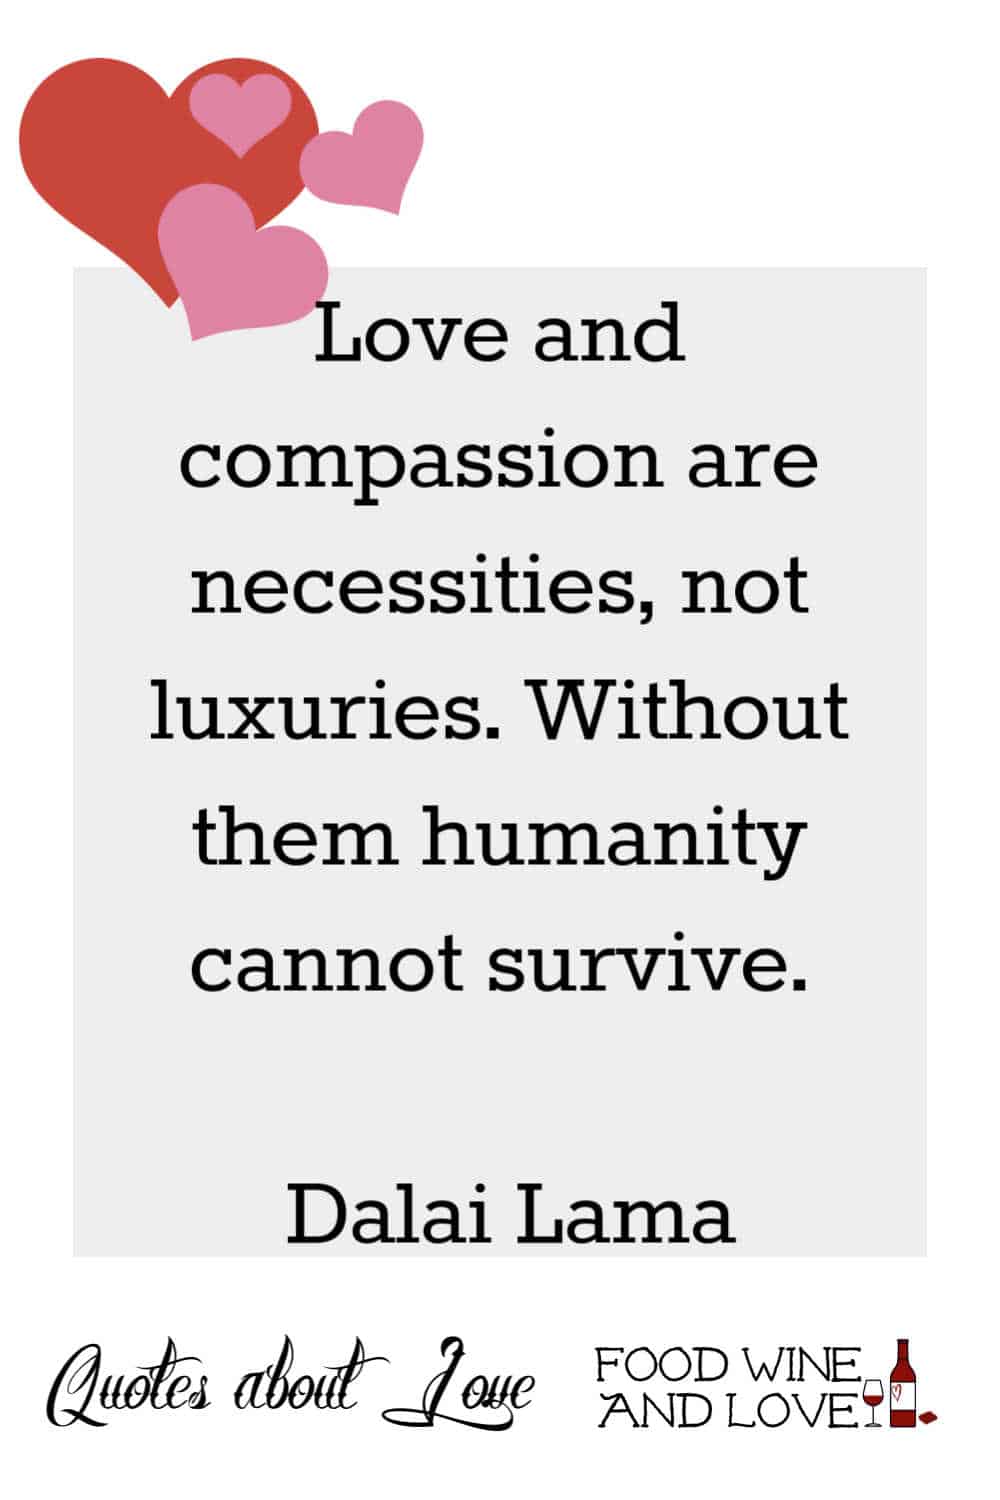 Love and compassion are necessities, not luxuries. Without them humanity cannot survive.  Dalai Lama